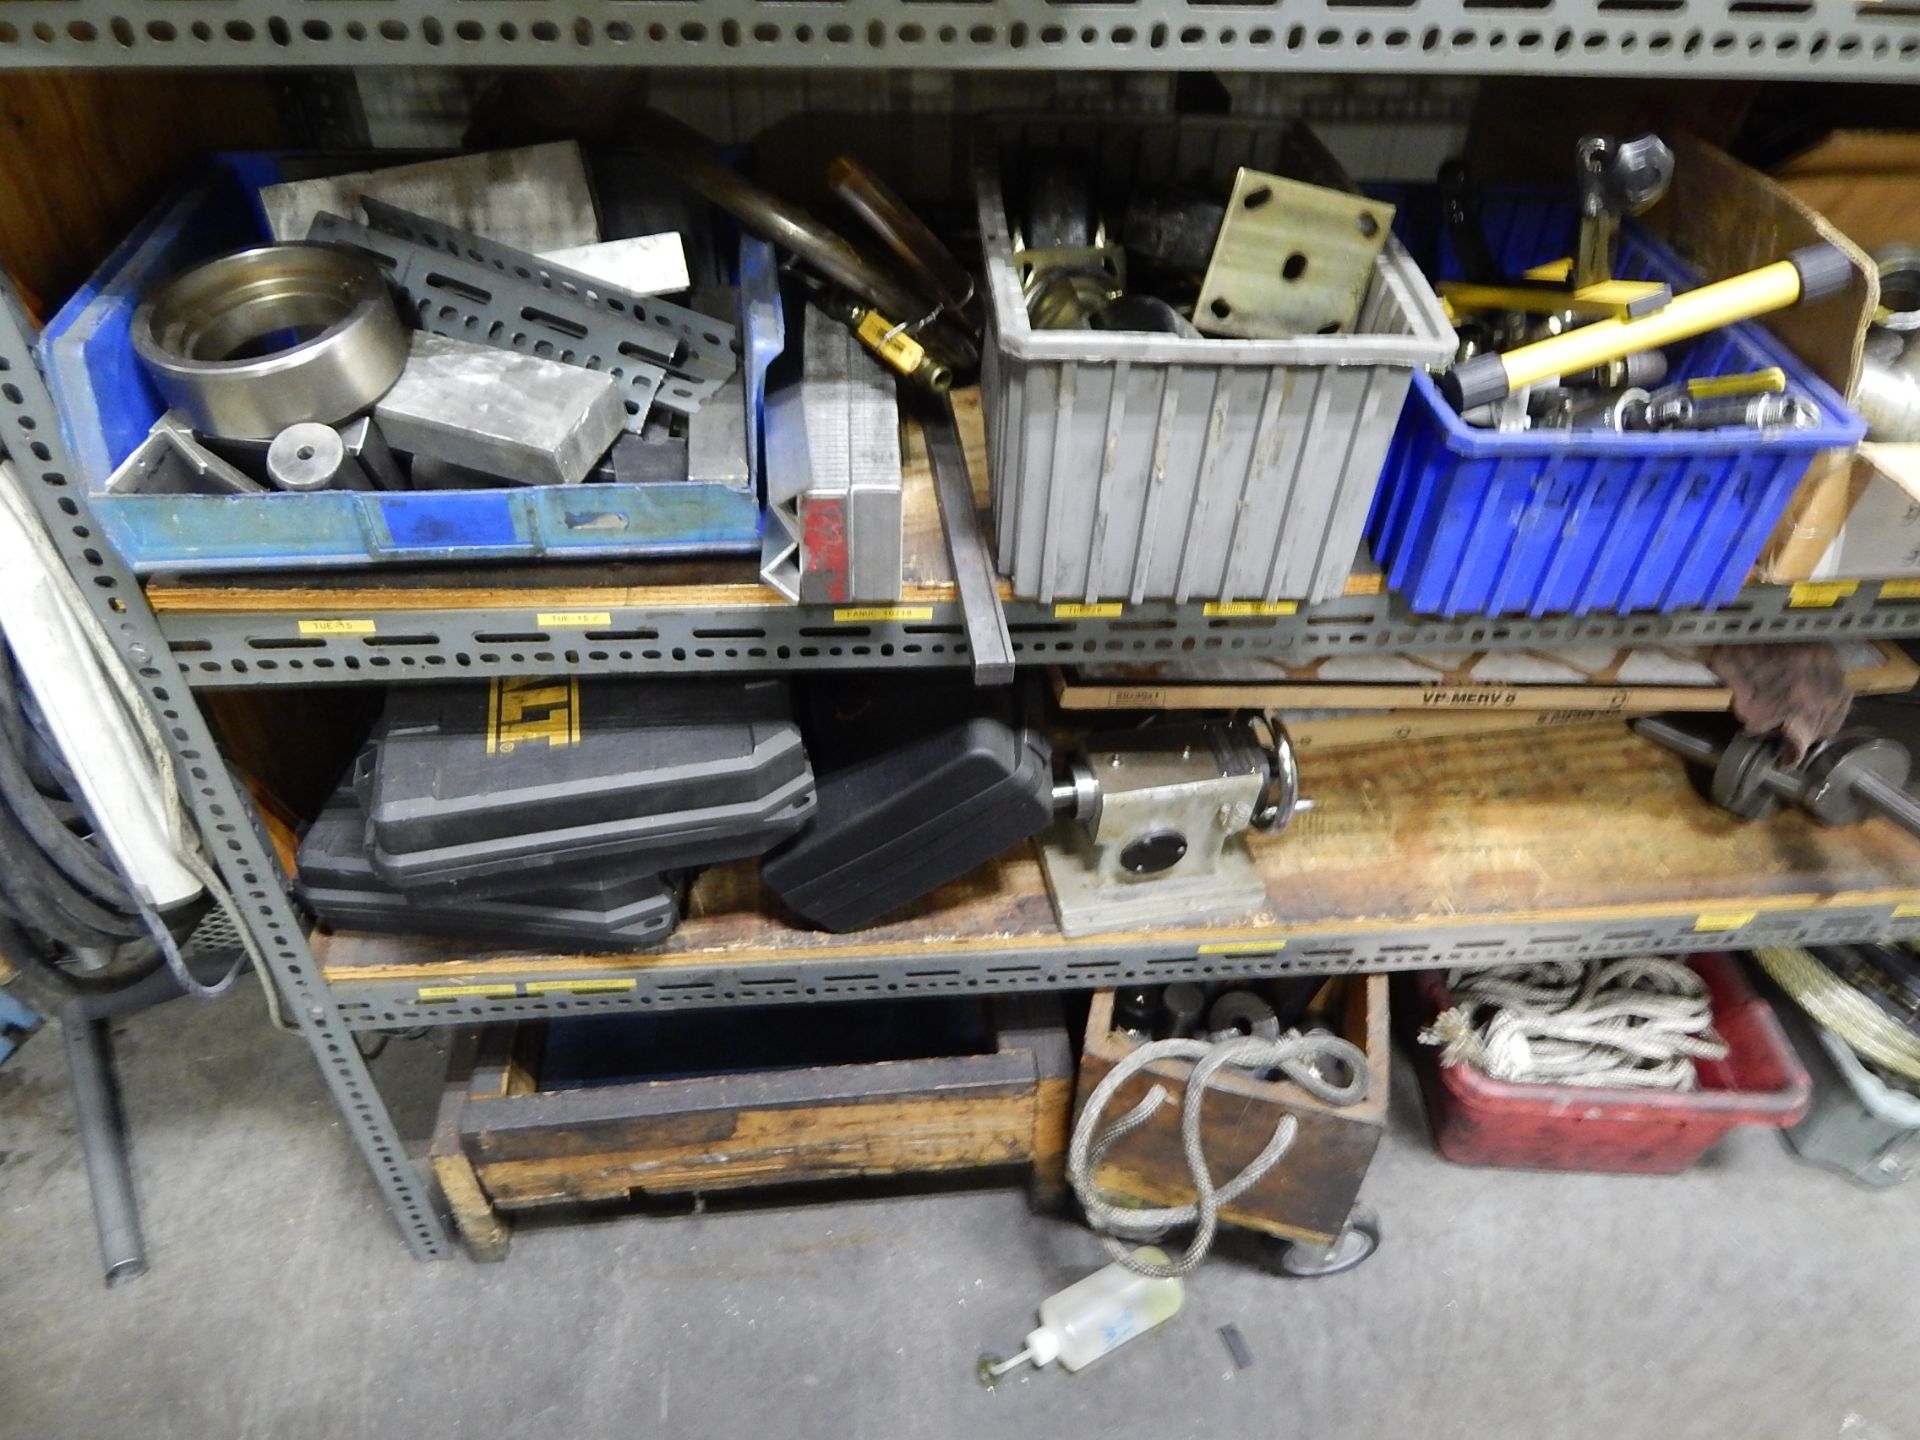 Metal Shelving and Contents of MRO Items - Image 2 of 4